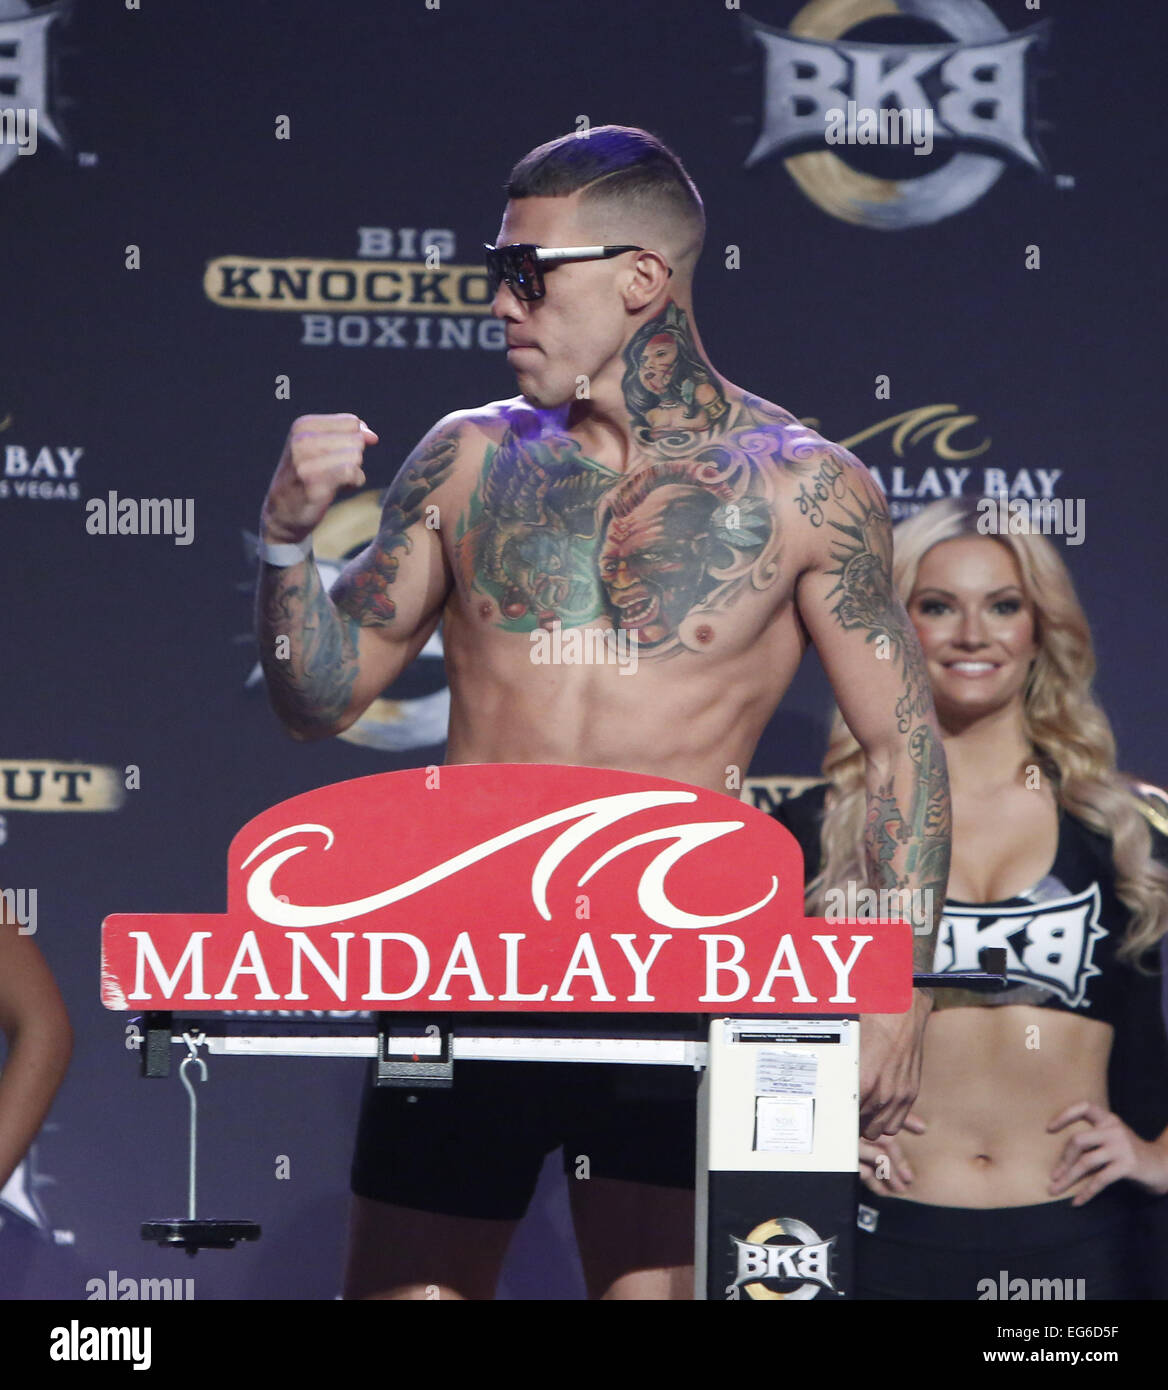 Competitors weigh in for the Big Knockout Boxing event at Mandalay Bay Resort Featuring: Gabriel Rosado Where: Las Vegas, Nevada, United States When: 16 Aug 2014 Stock Photo